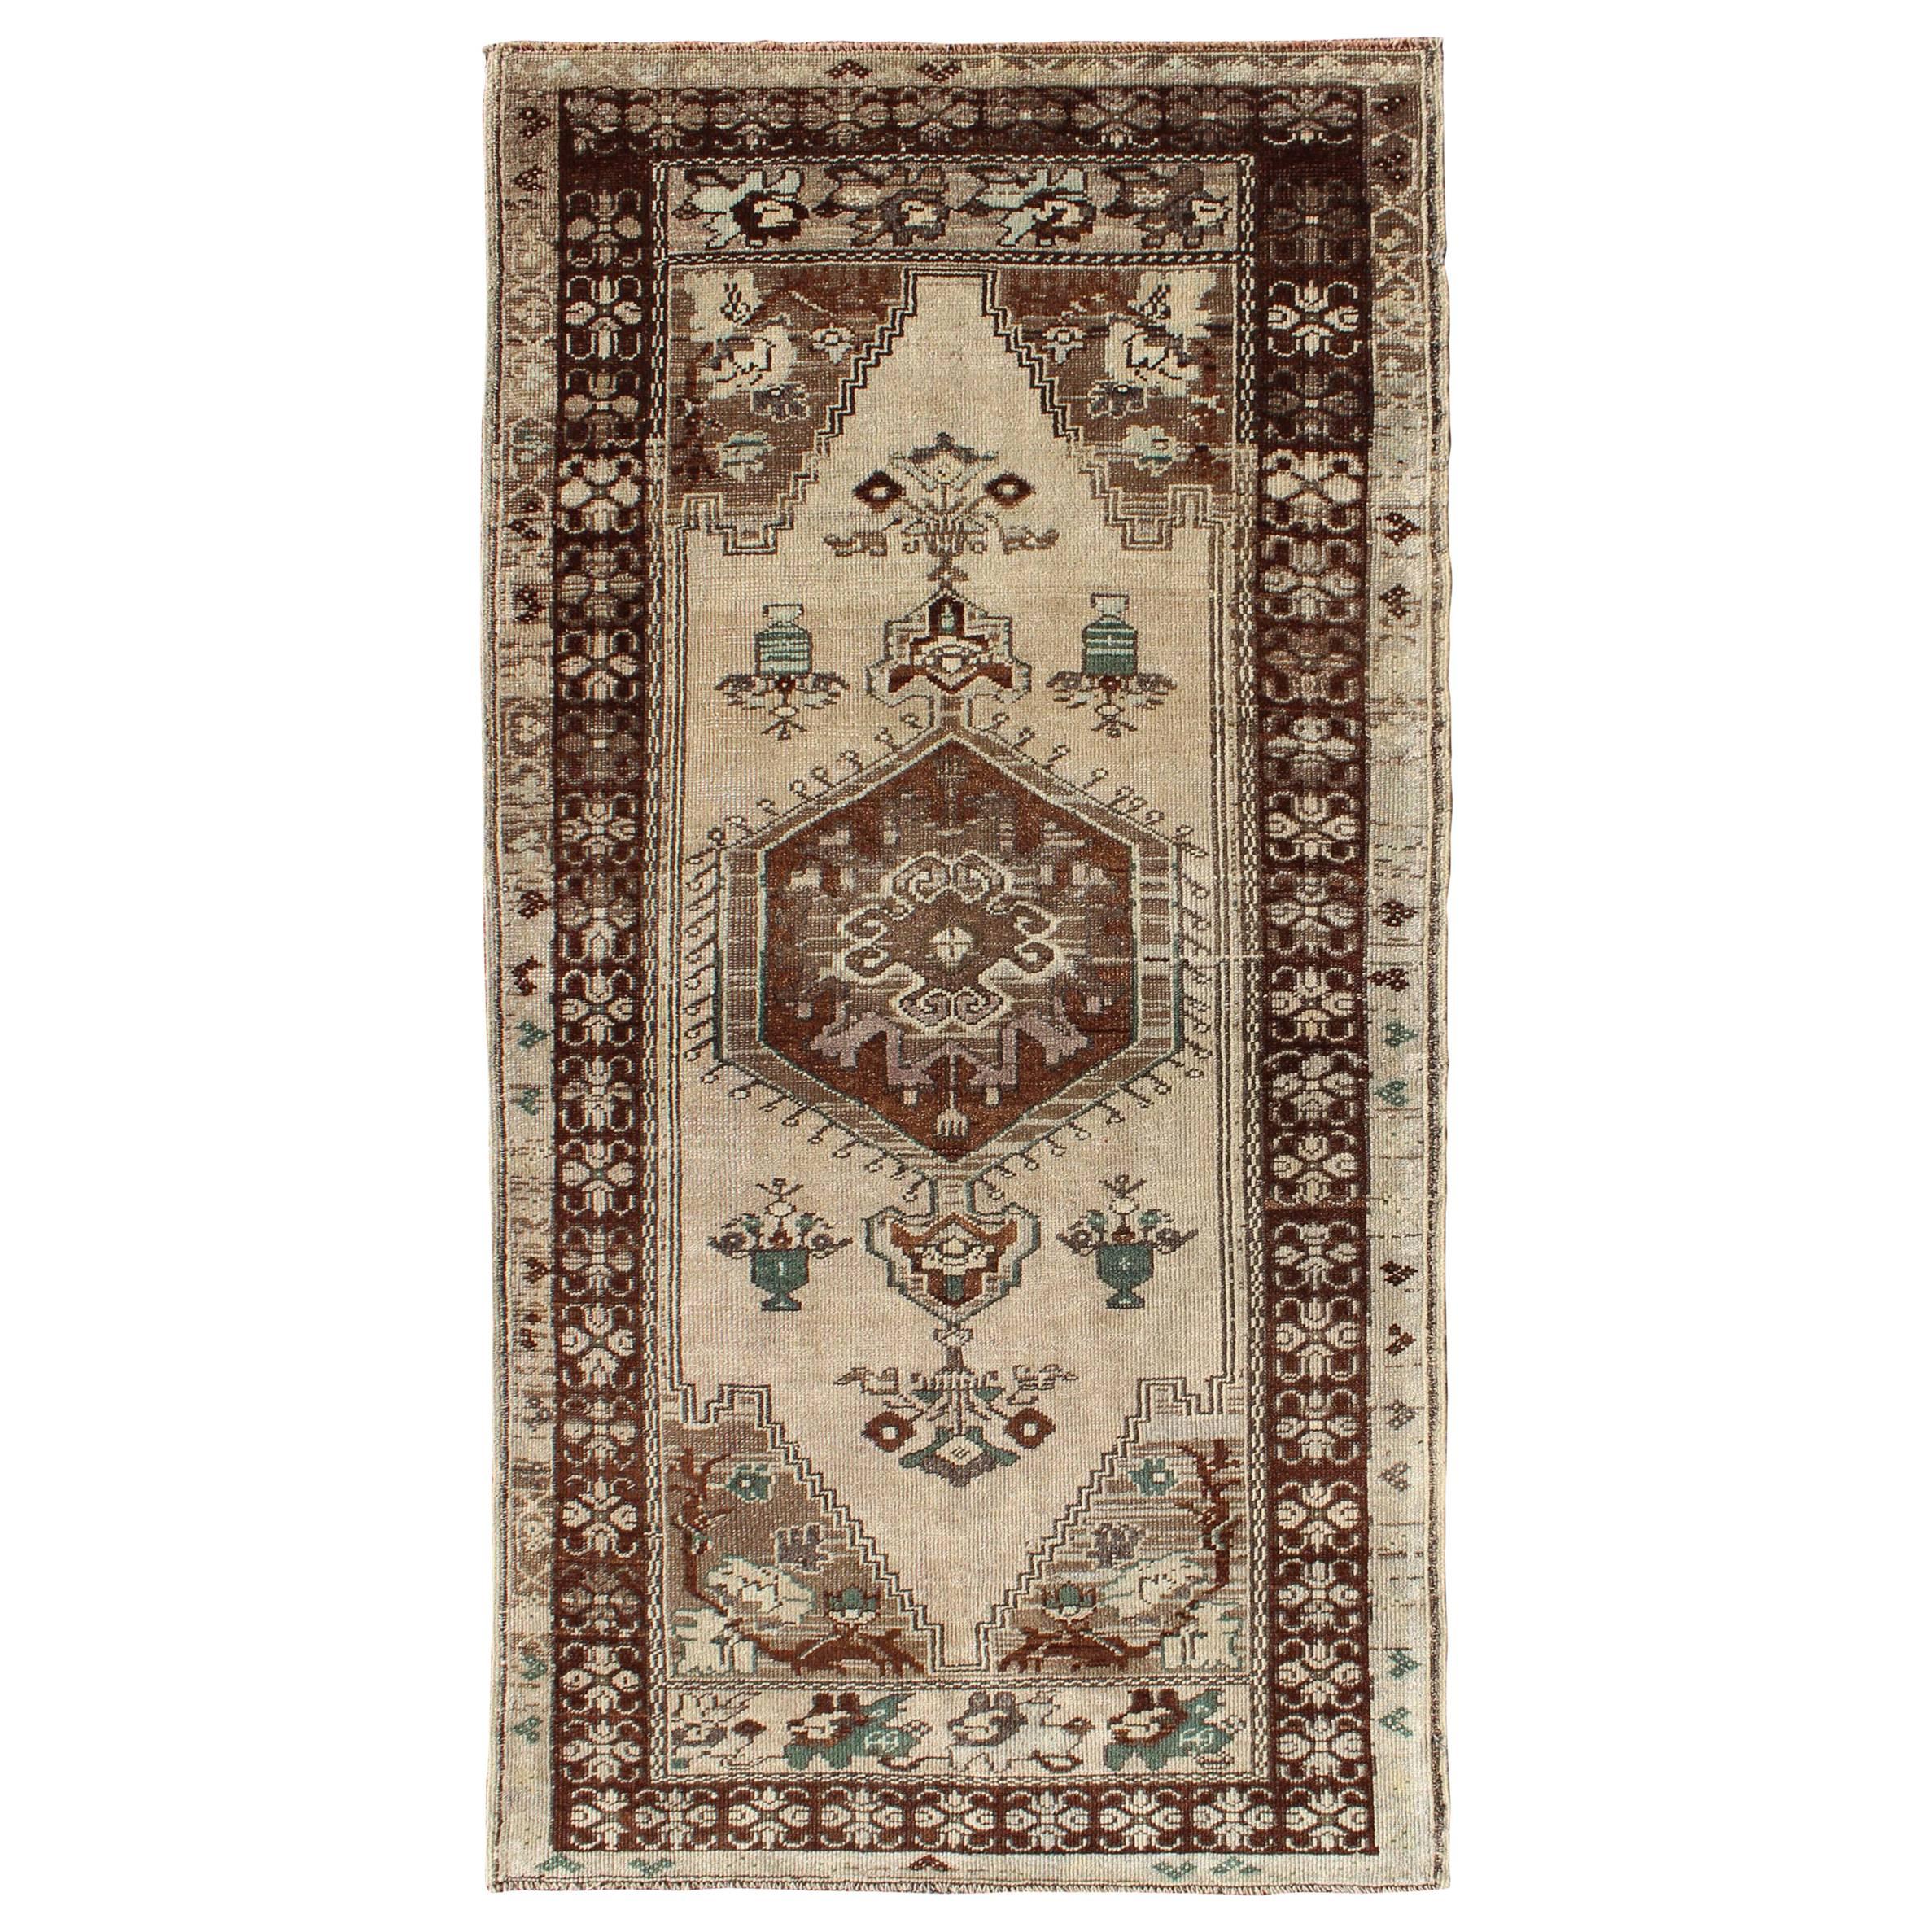 Turkish Oushak Vintage Rug with Central Medallion and Floral Motifs in Brown